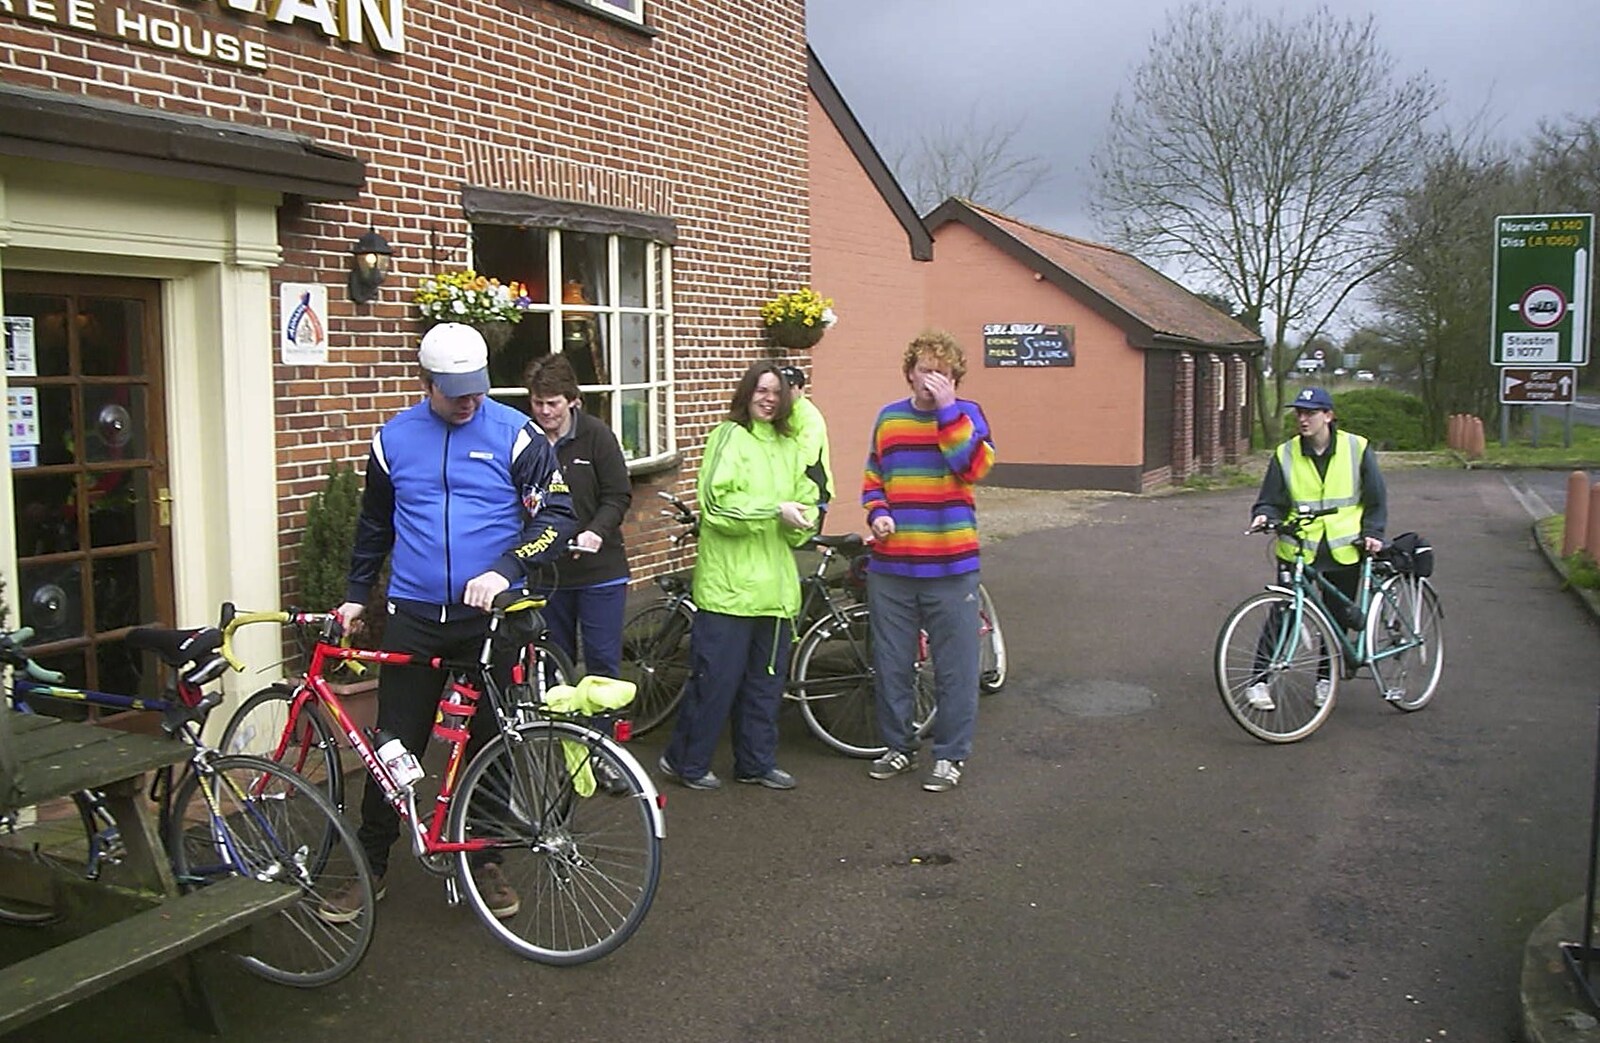 The BSCC Easter Bike Ride, Thelnetham and Redgrave, Suffolk - 10th April 2004: The group of riders assembles outside the Swan